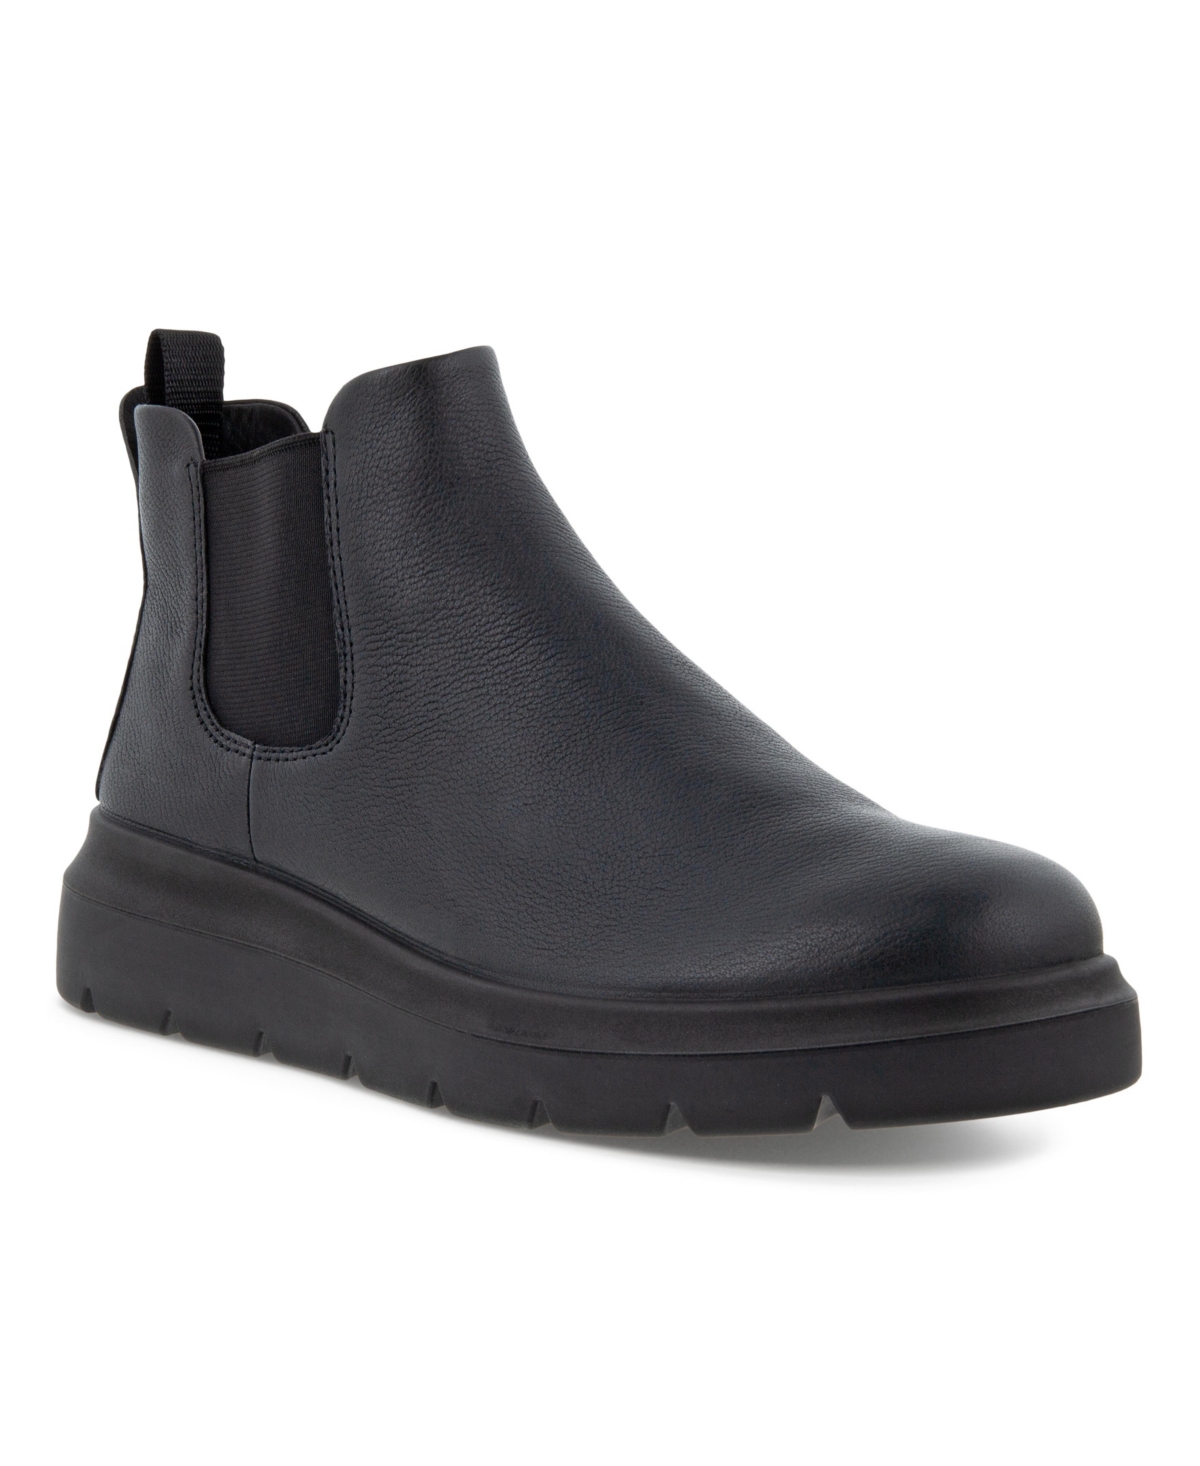 UPC 194890905047 product image for Ecco Women's Nouvelle Chelsea Nubuck Leather Boot Women's Shoes | upcitemdb.com